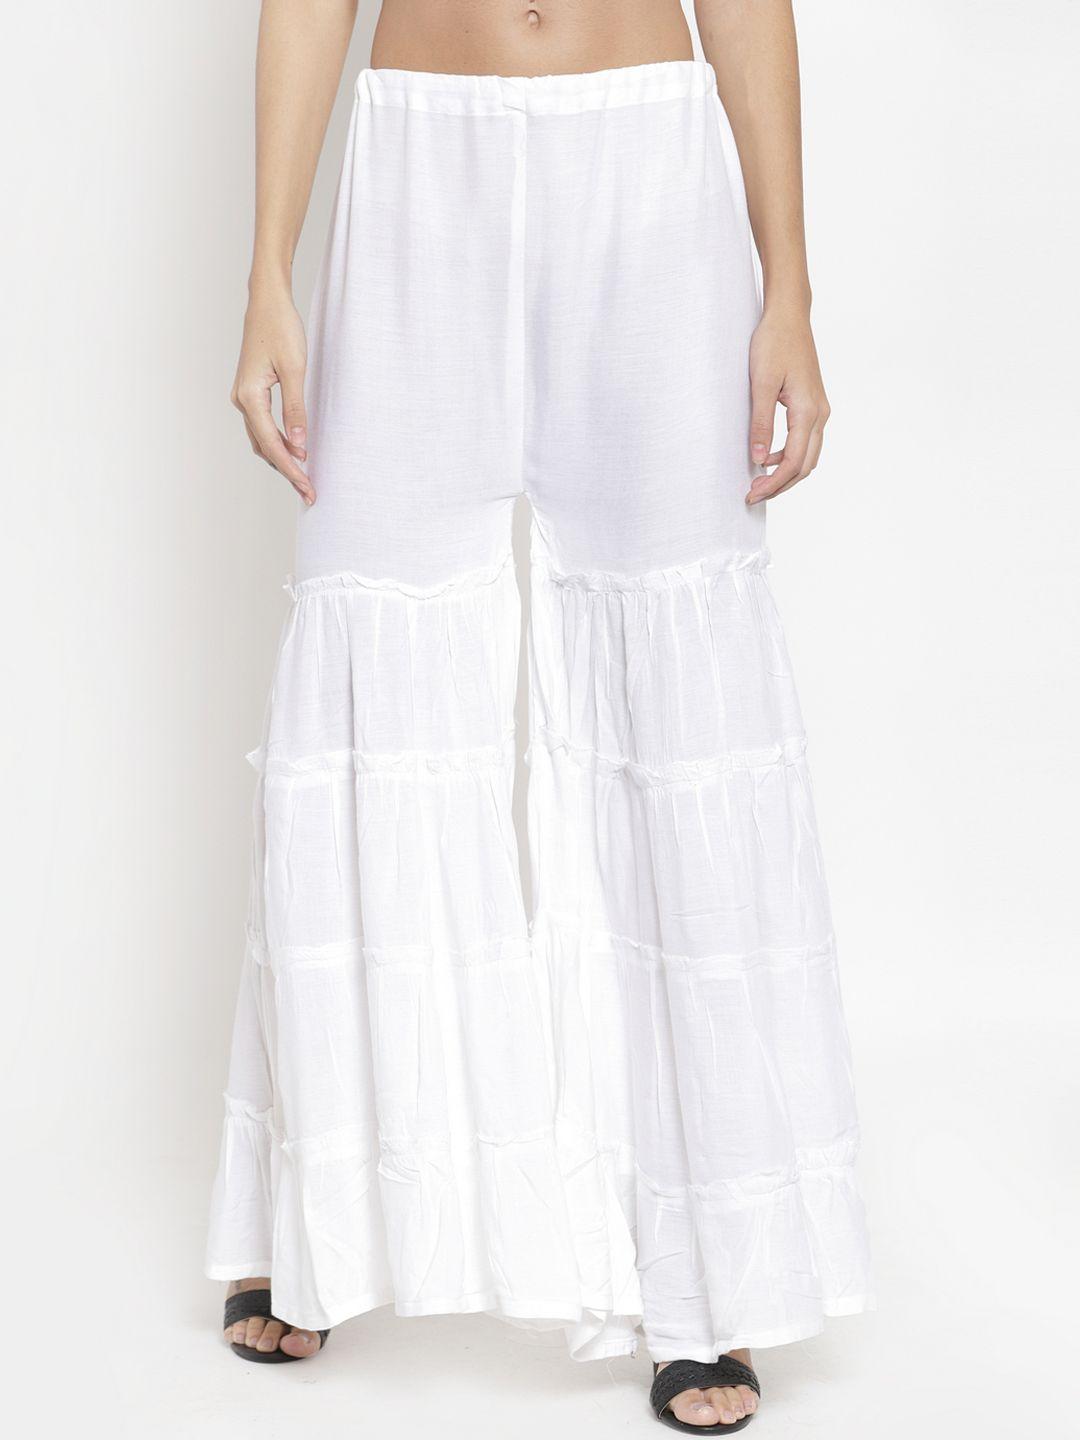 clora creation women white solid flared tiered palazzos